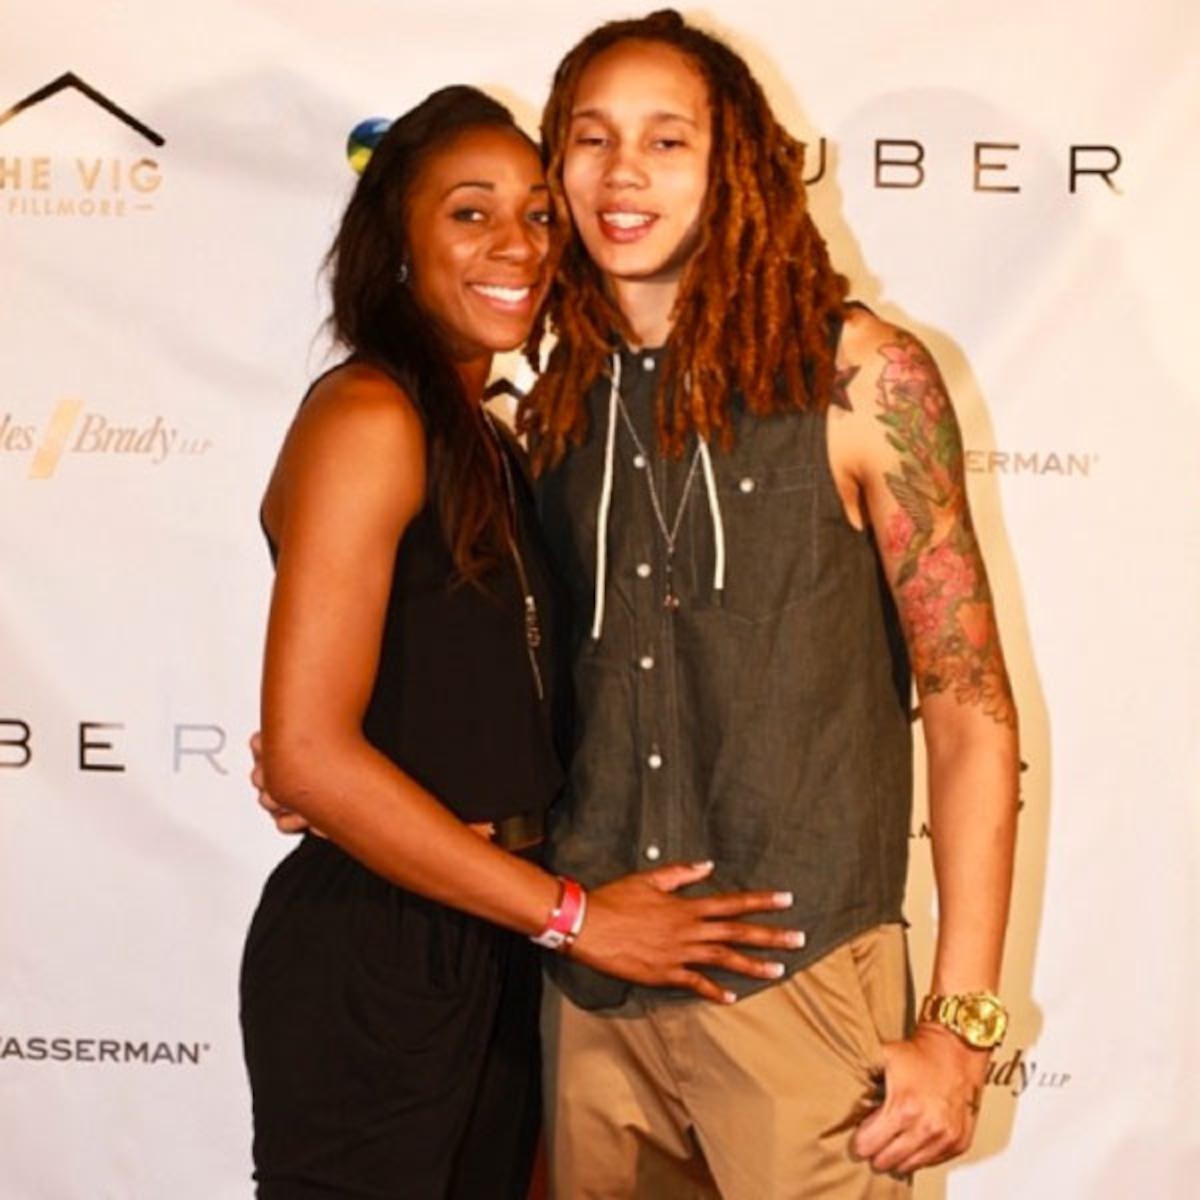 Who Is Glory Johnson's Husband? She Was Previously Married To Brittney Griner